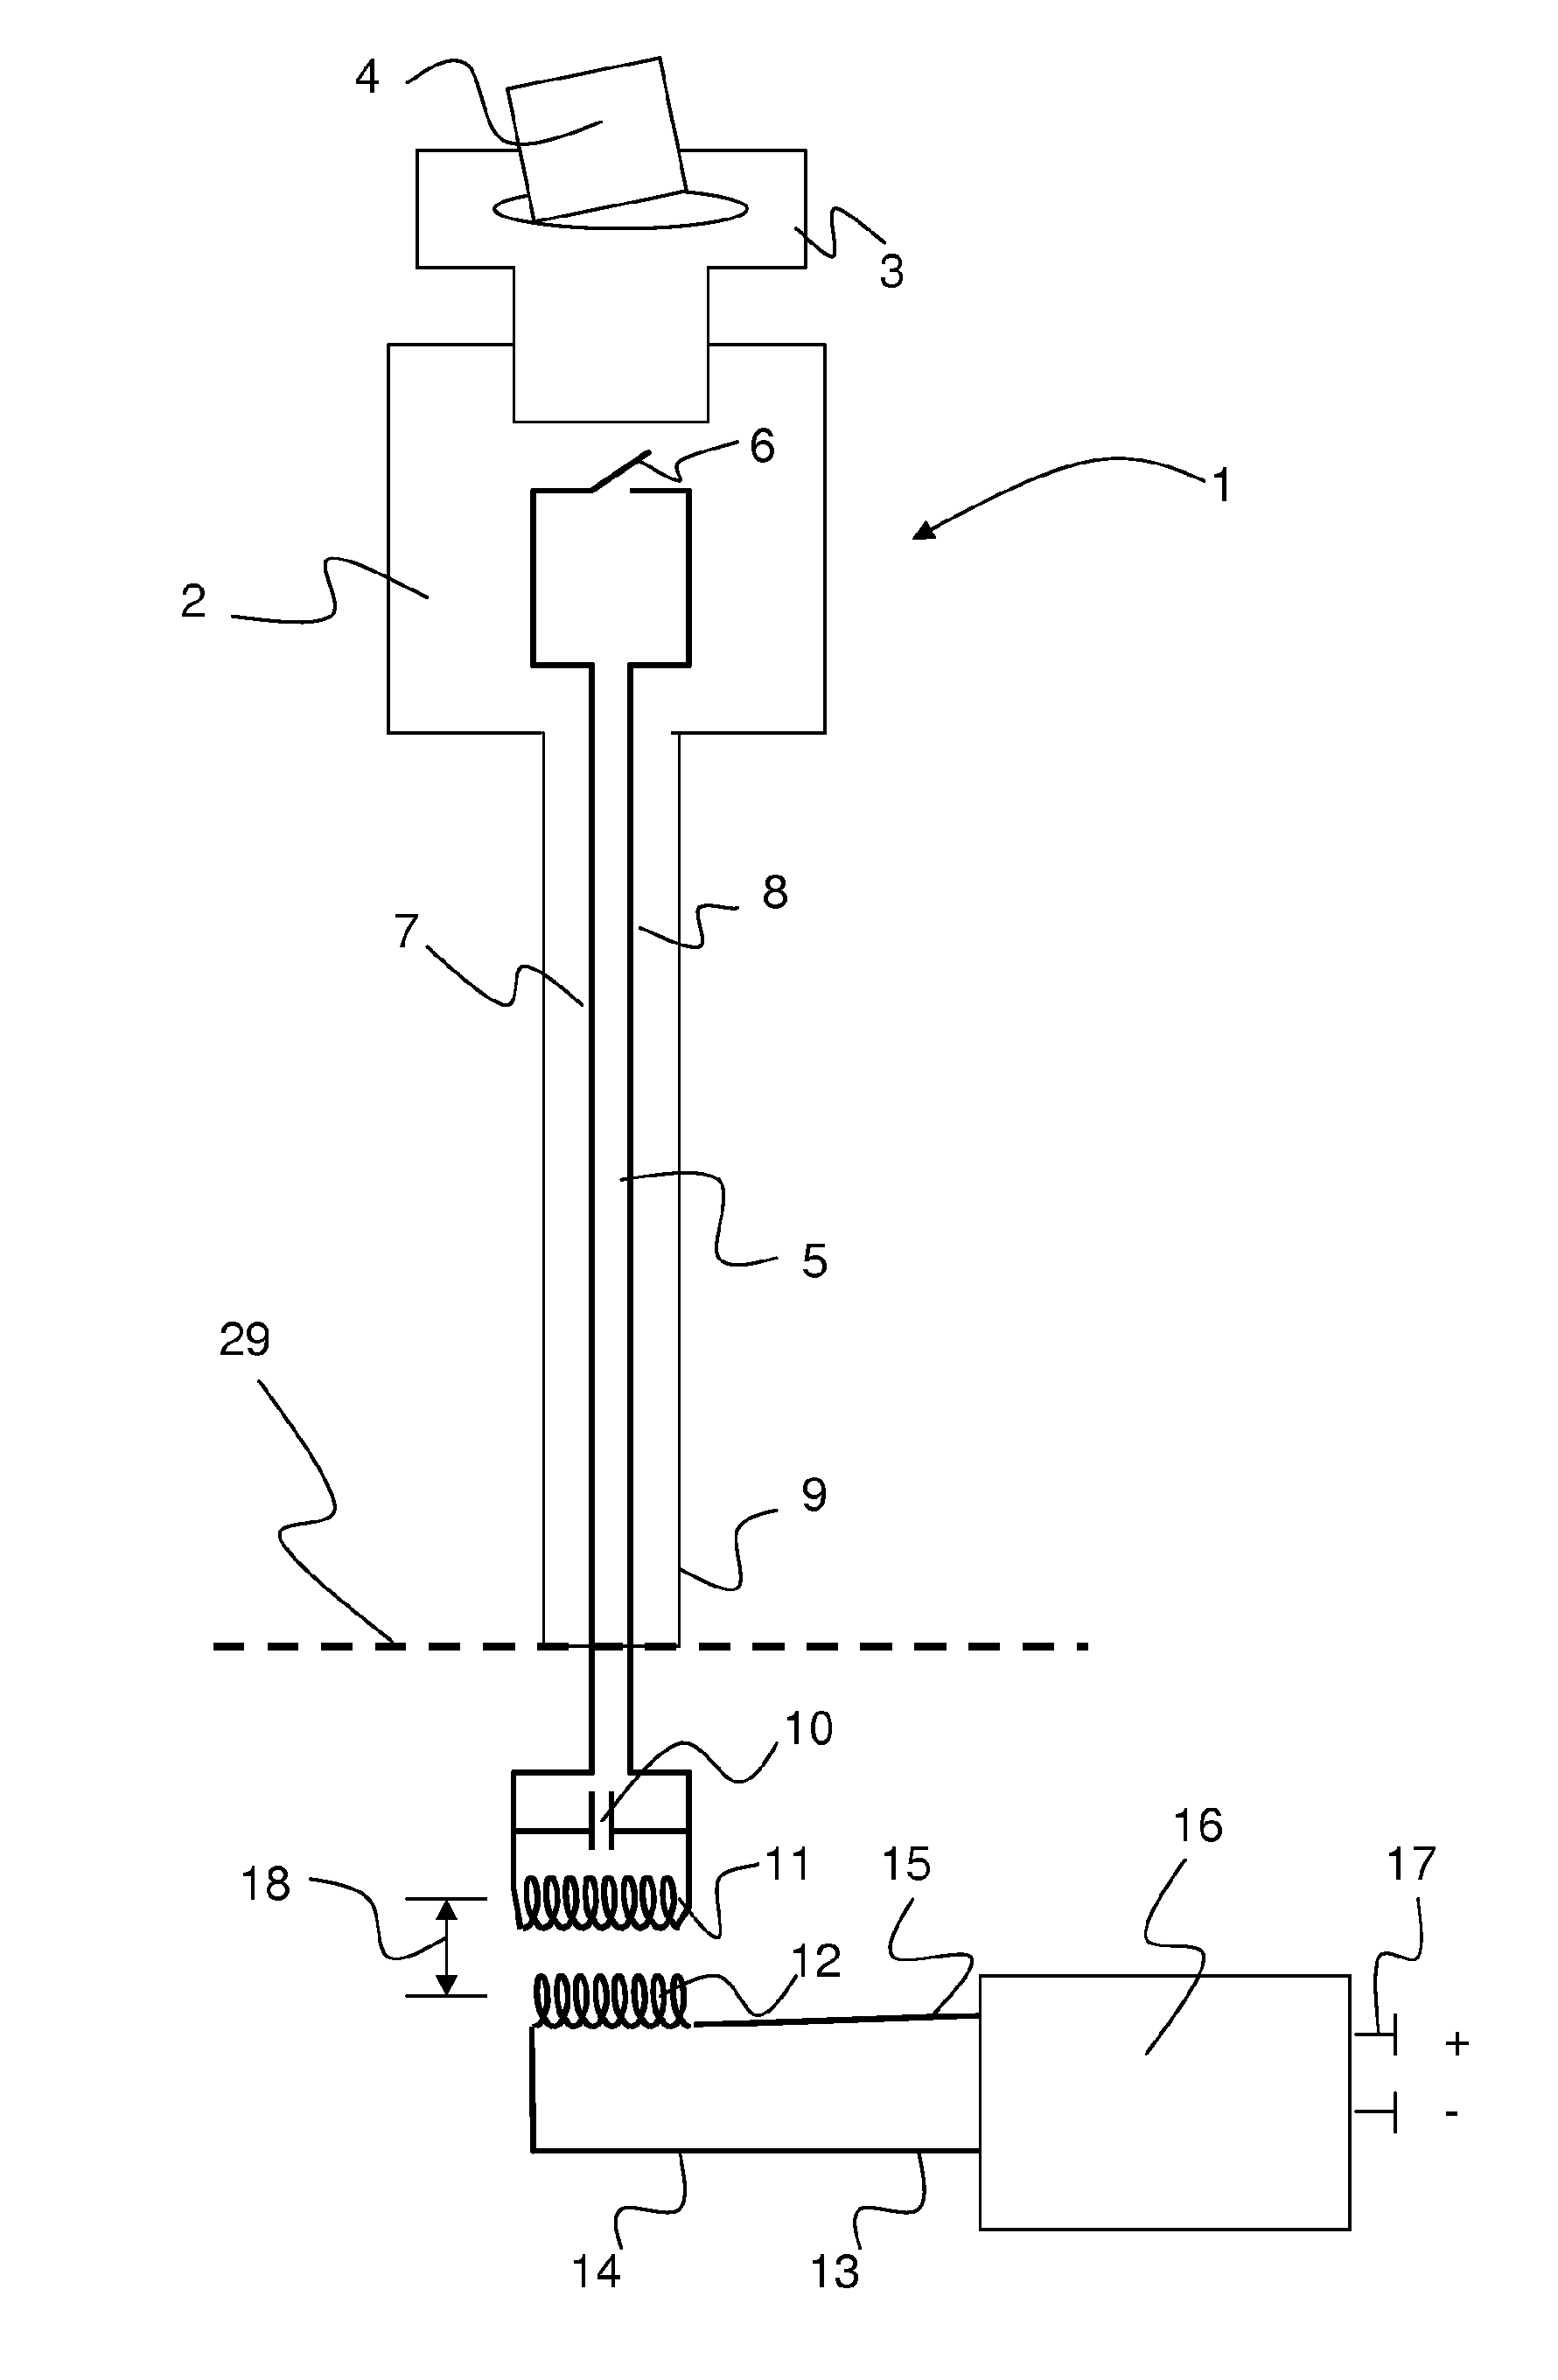 Electronic status detection device